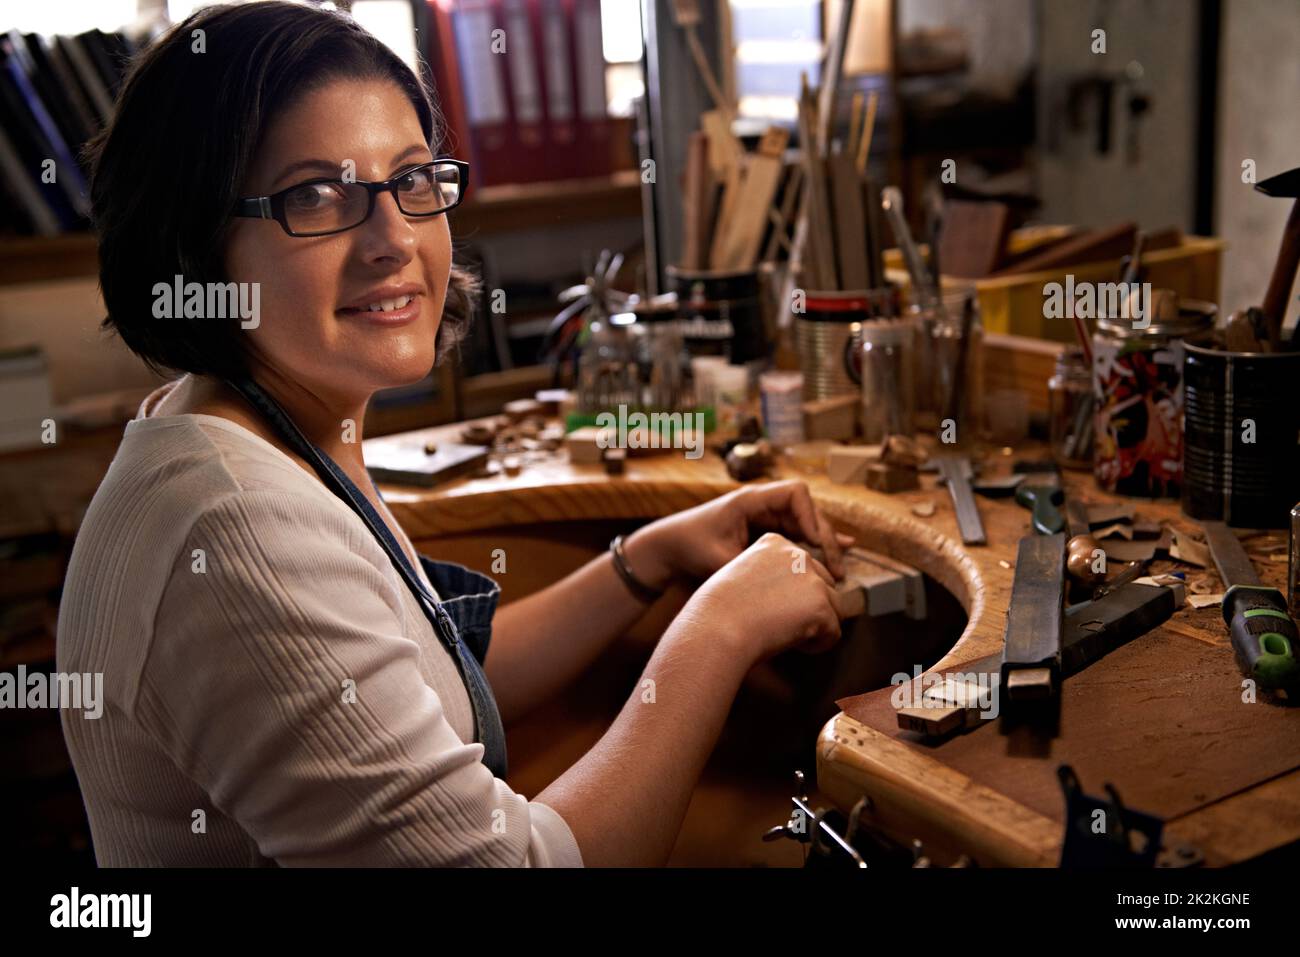 Creativity at work. A happy young woman working at a woodworking bench. Stock Photo